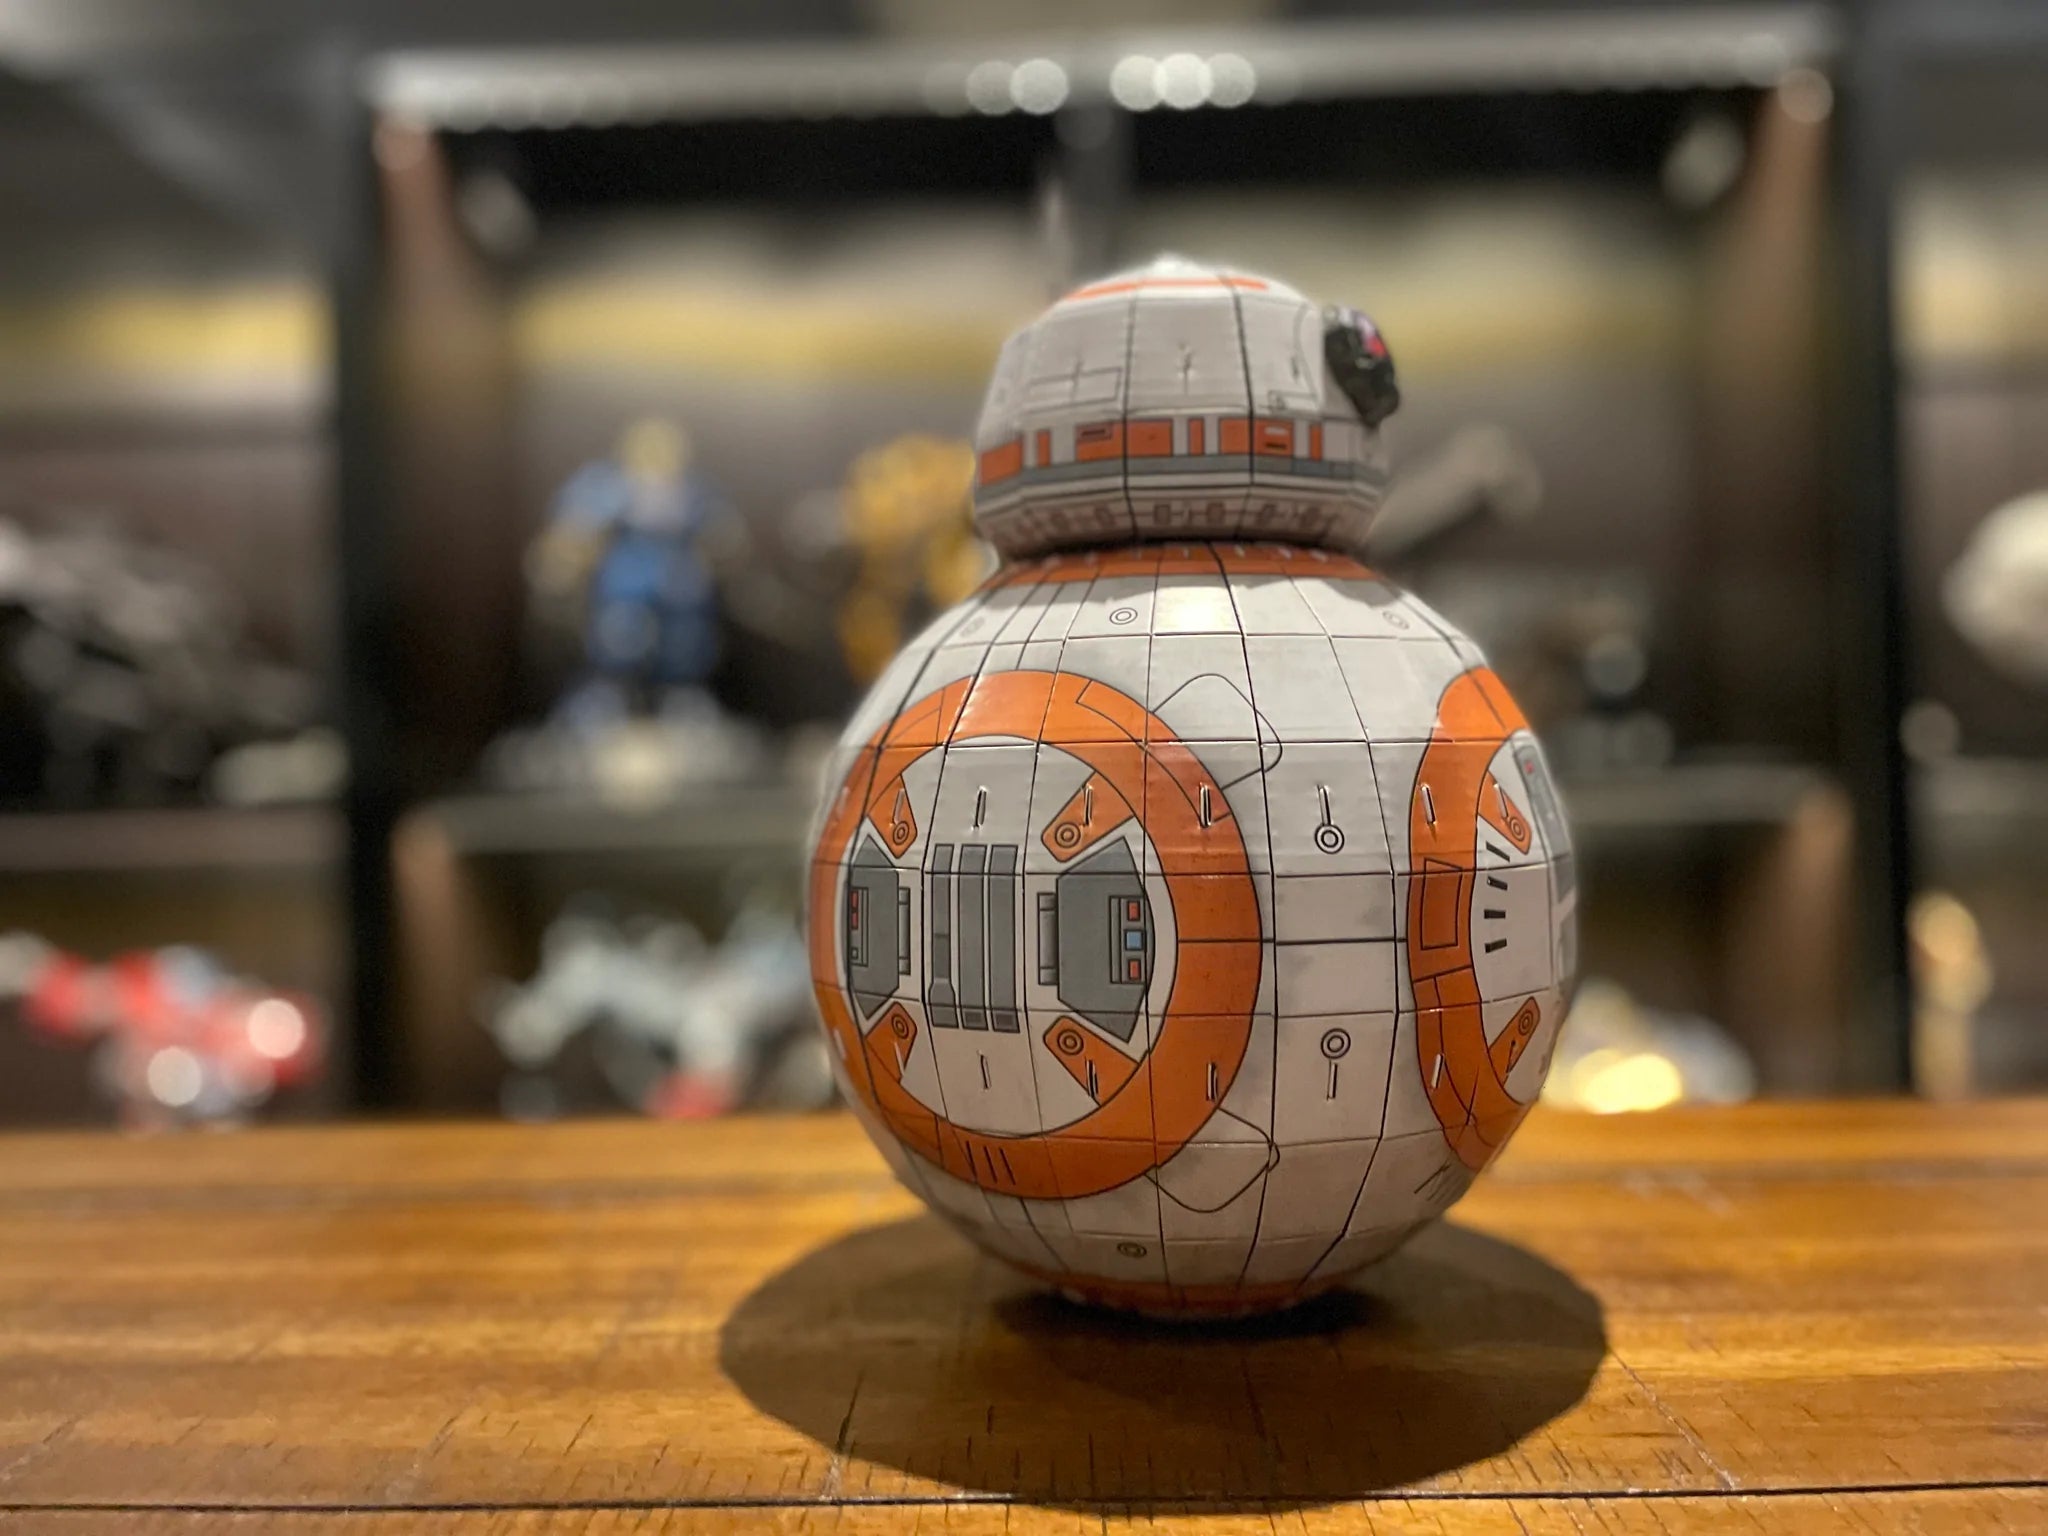 3D Puzzle | Star Wars BB-8 Model by Weirs of Baggot St